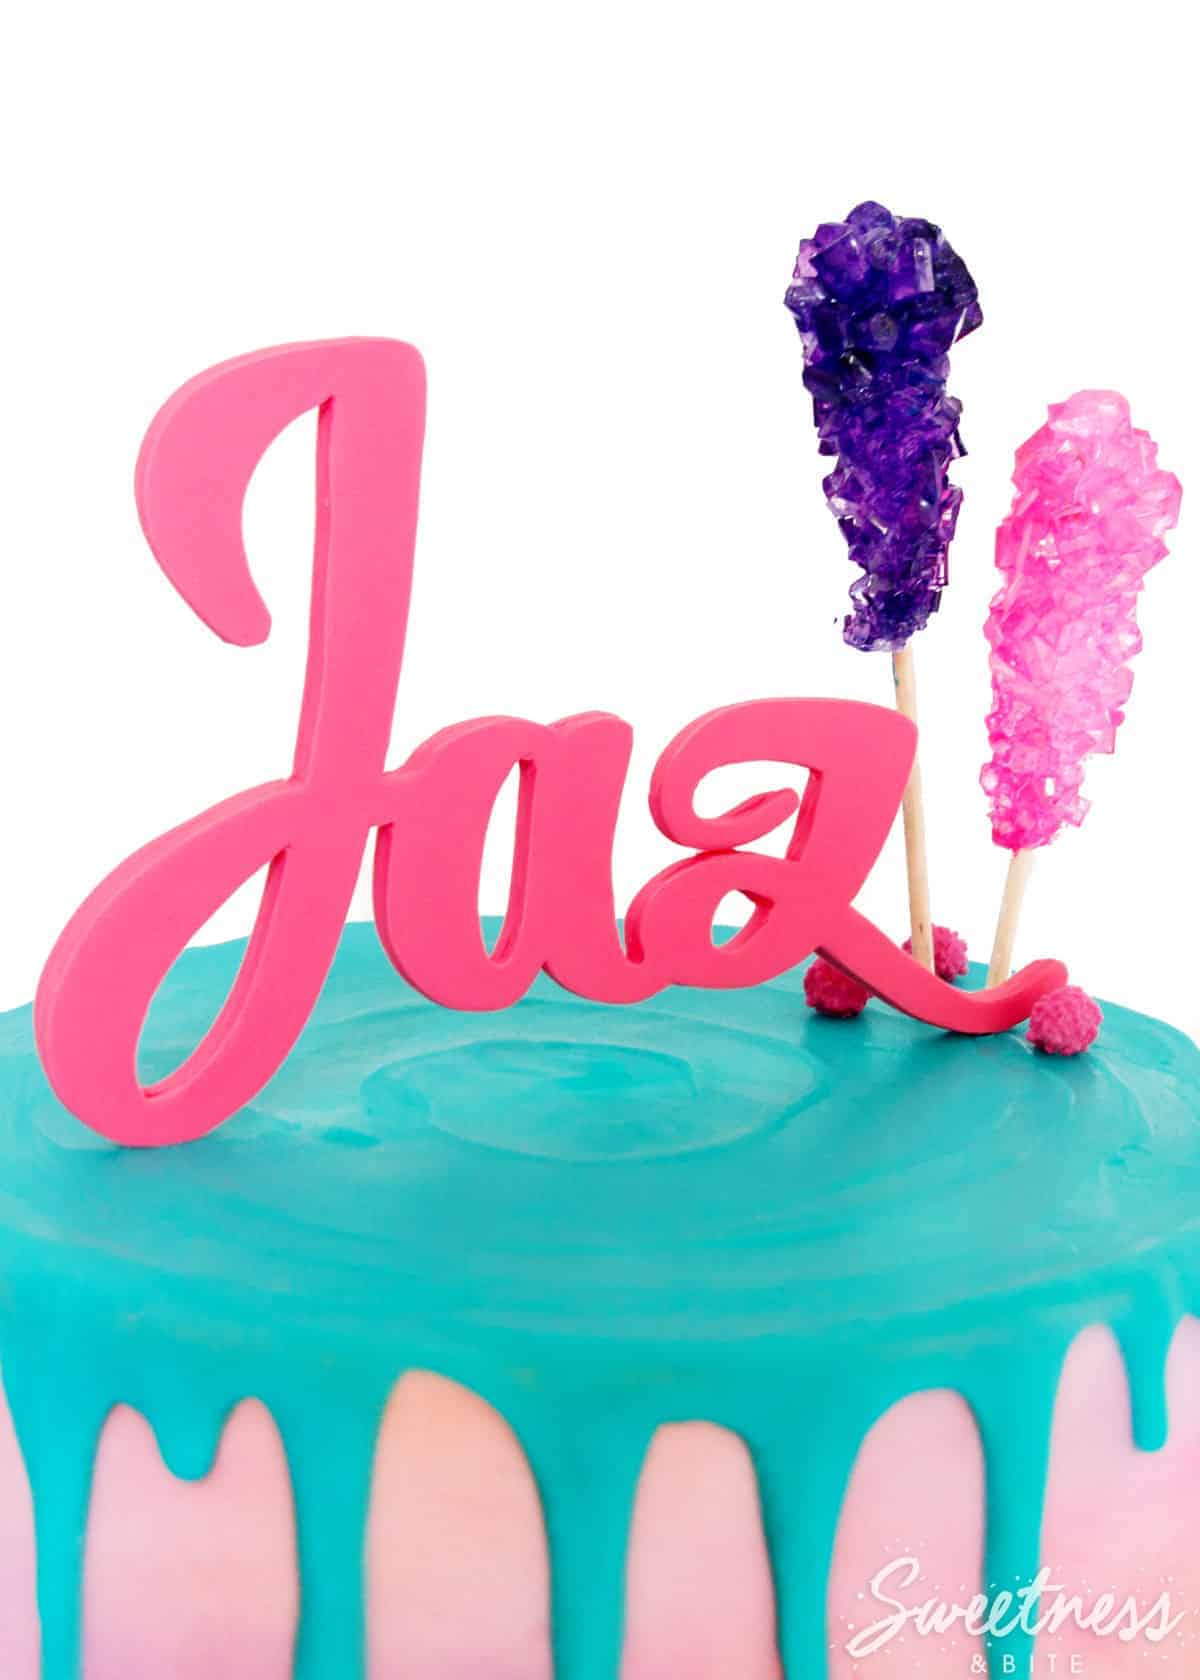 {Gum Paste Name Cake Topper Tutorial} ~ A step by step tutorial on creating a custom name cake topper. By Sweetness & Bite